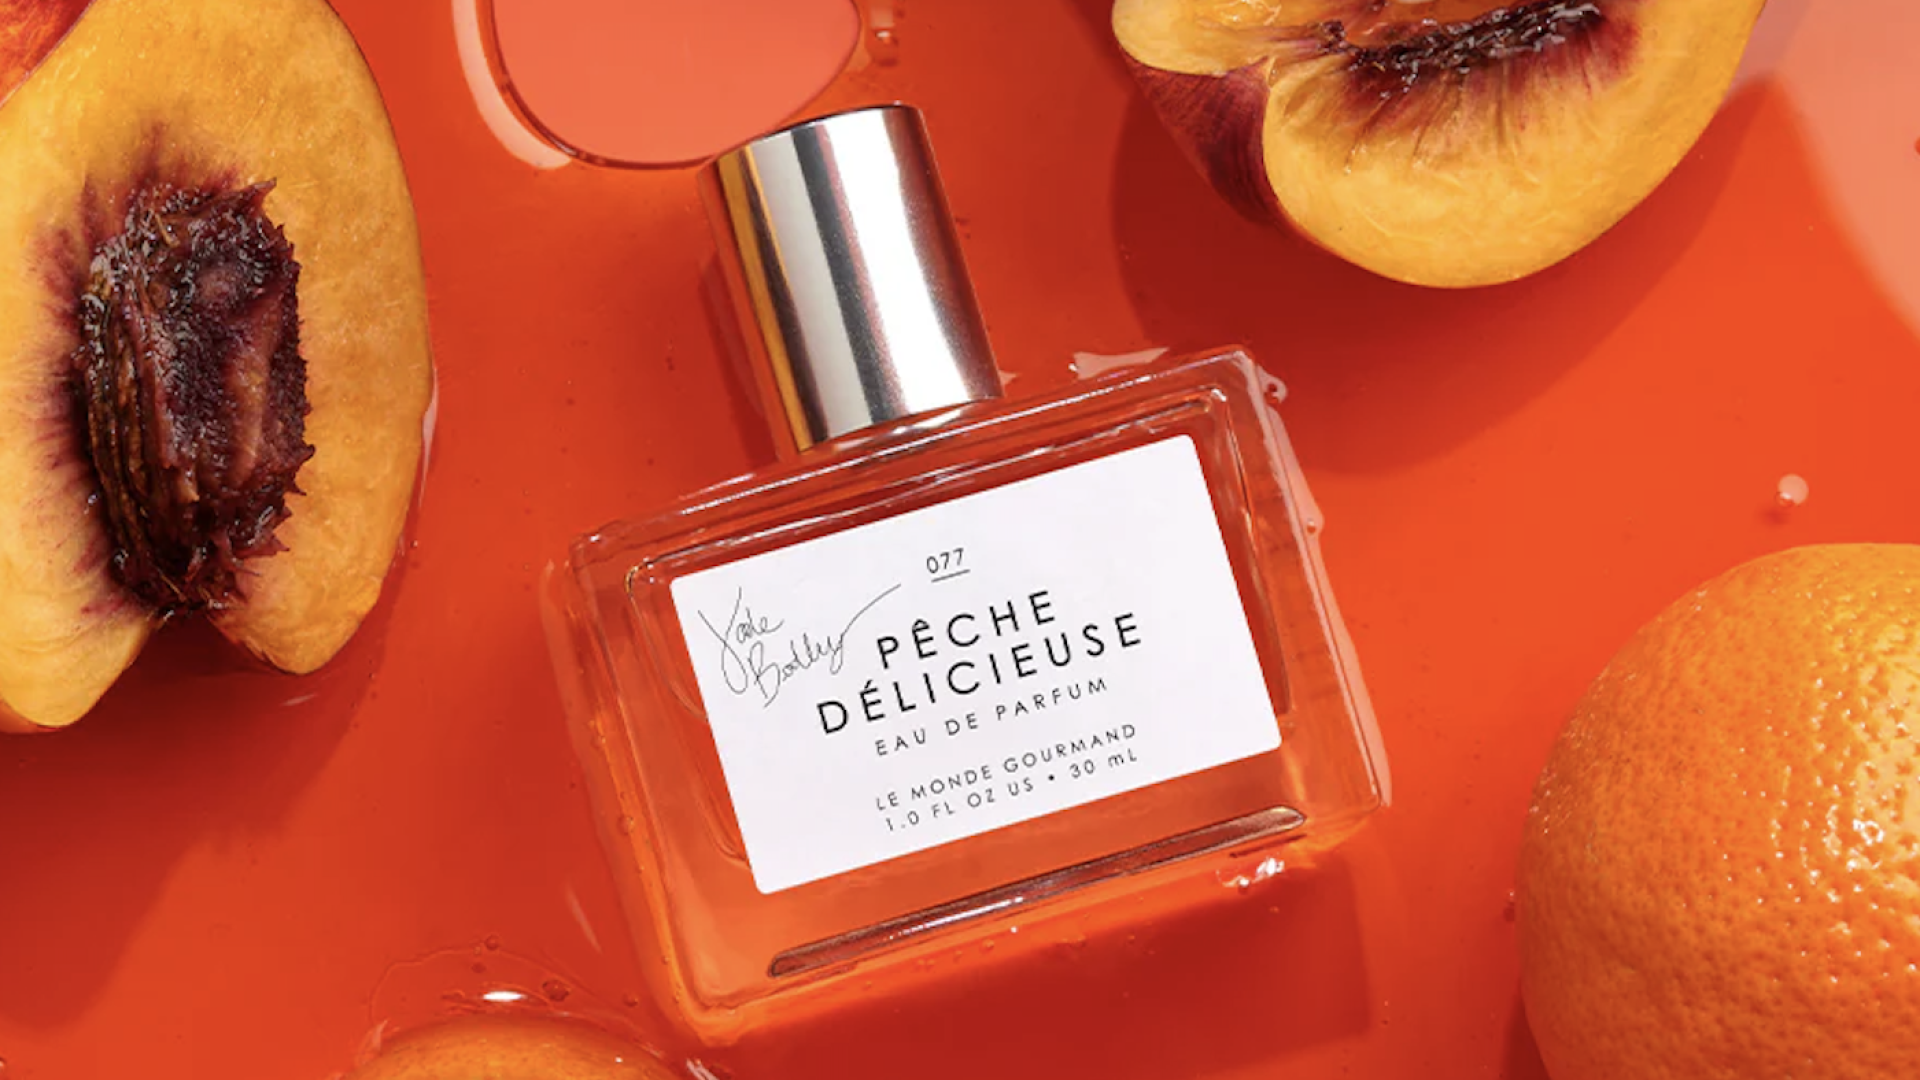 ESScent Of The Week: Jade Alyce’s Latest Collaboration With Le Monde Gourmand Is Peach Perfection